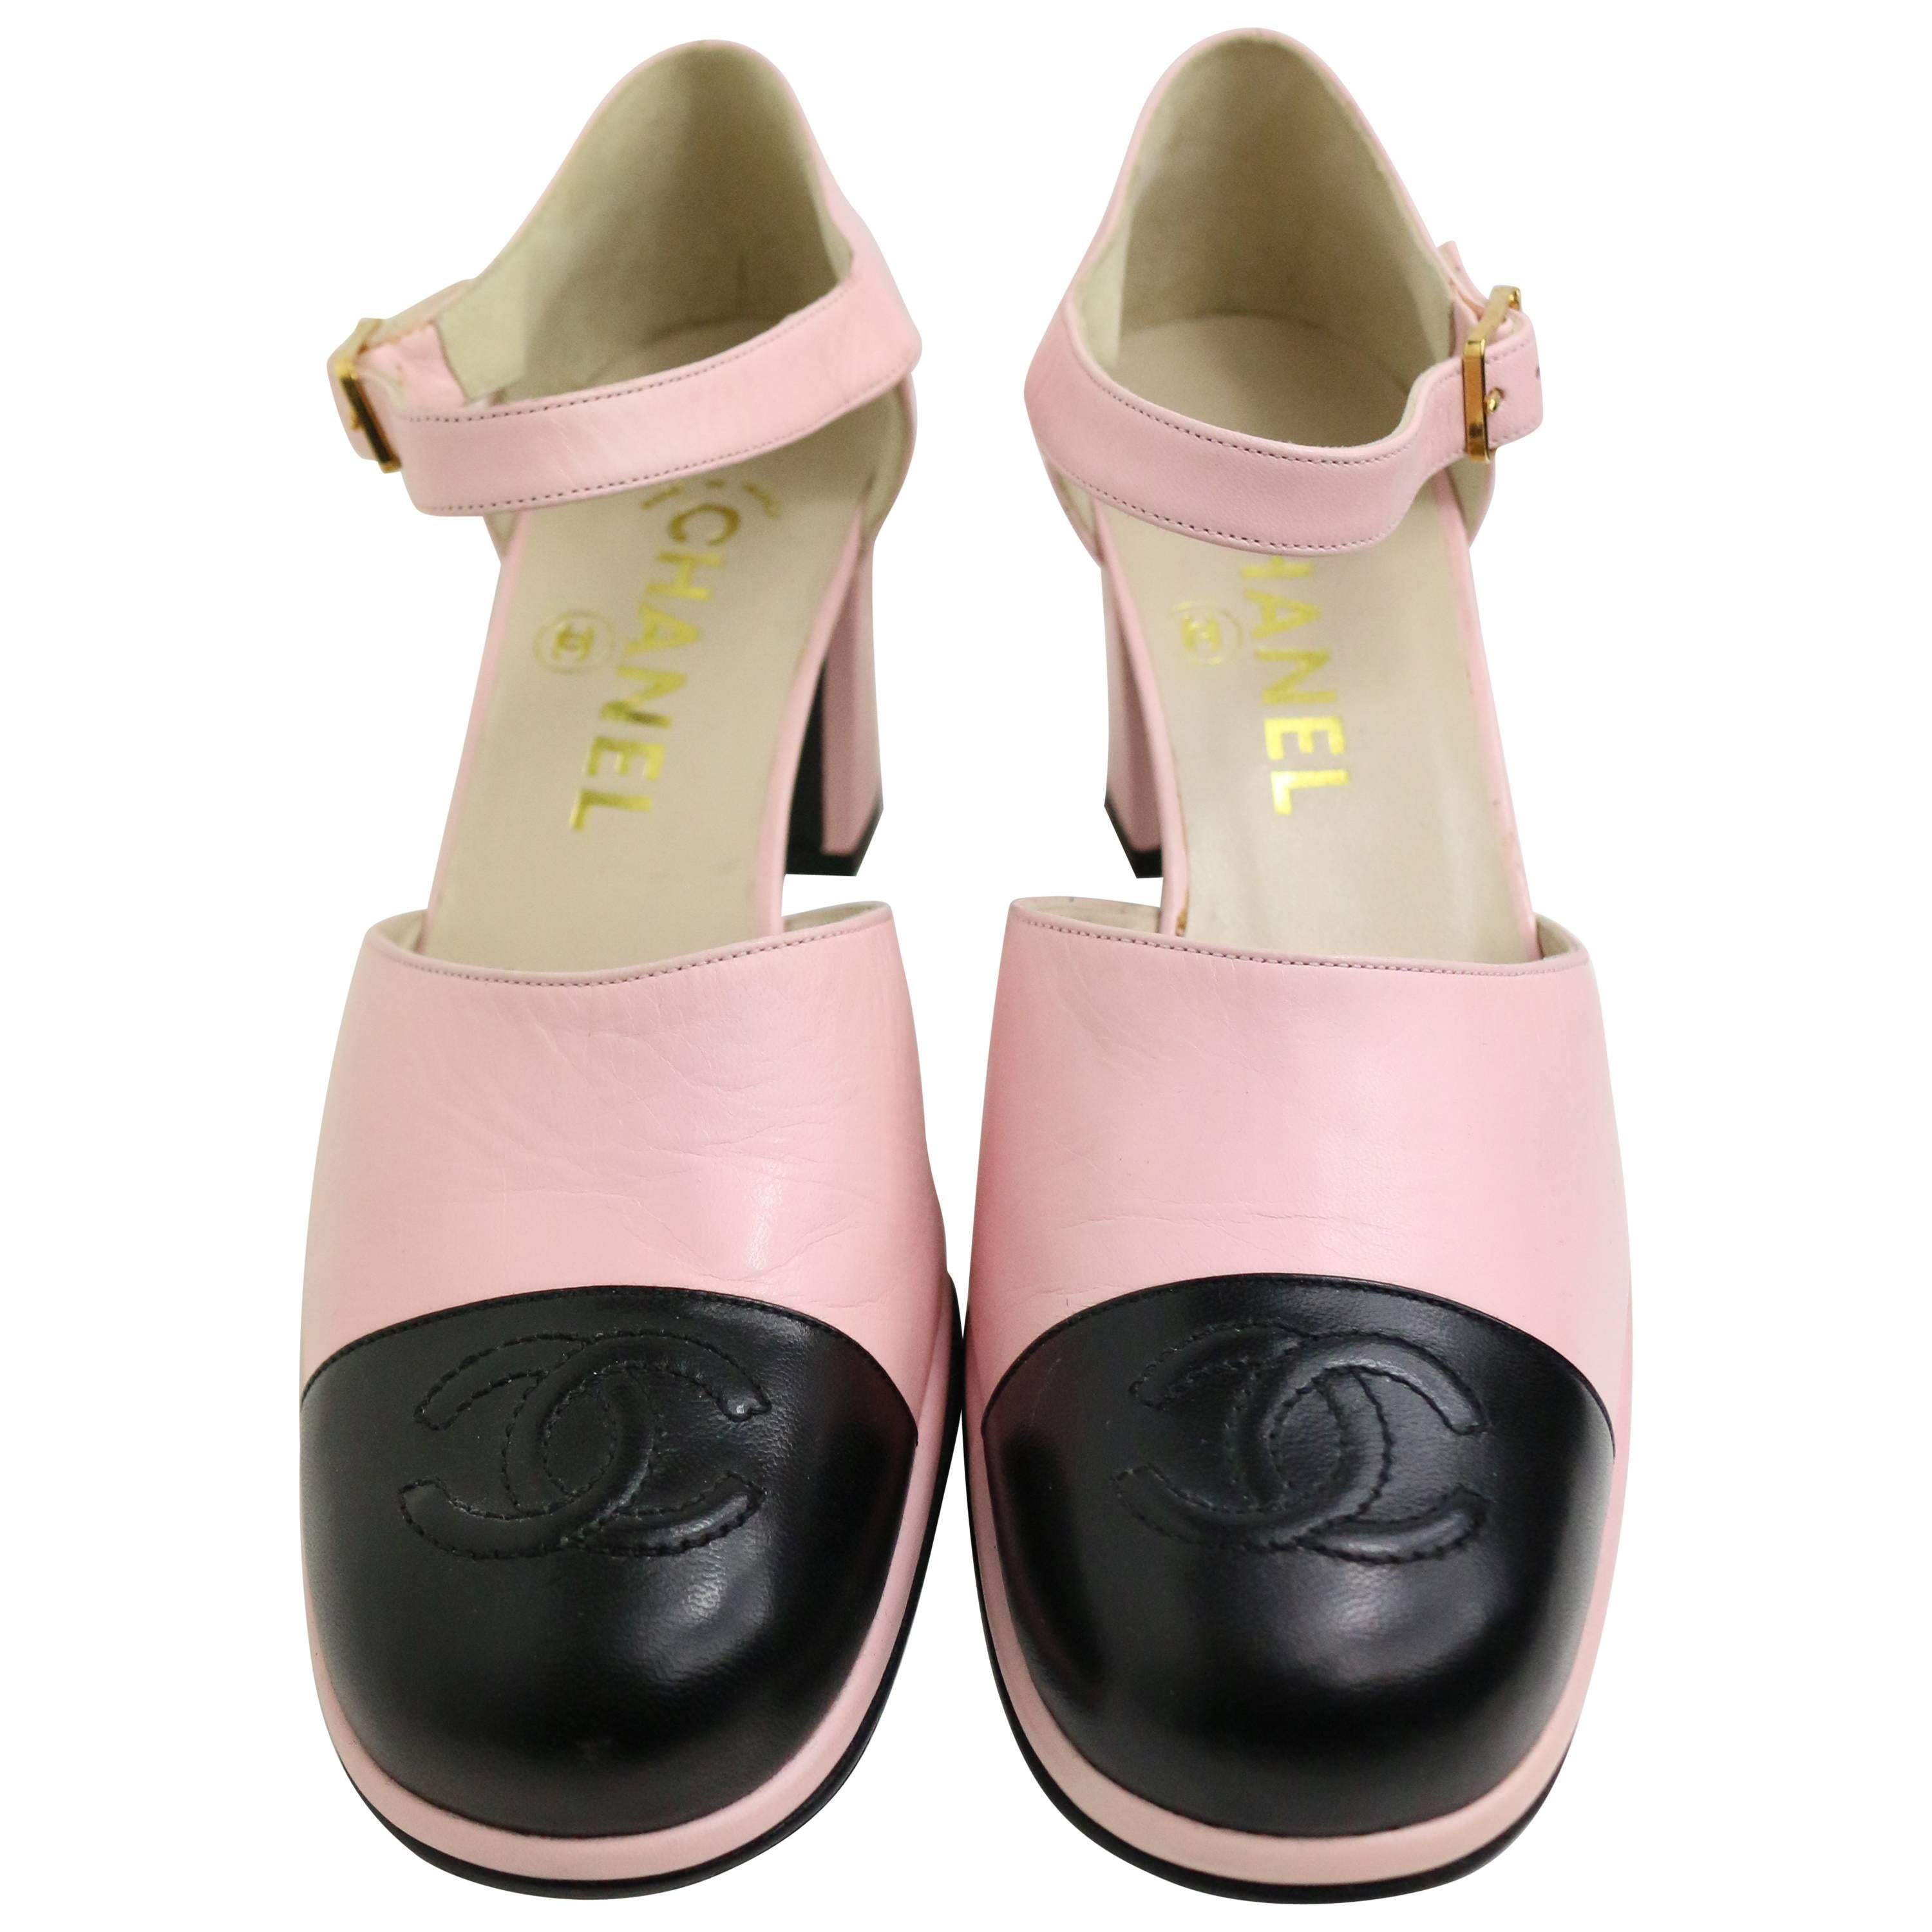 Chanel Pink Two Tones Leather "CC" Logo Strap Loafers Shoes